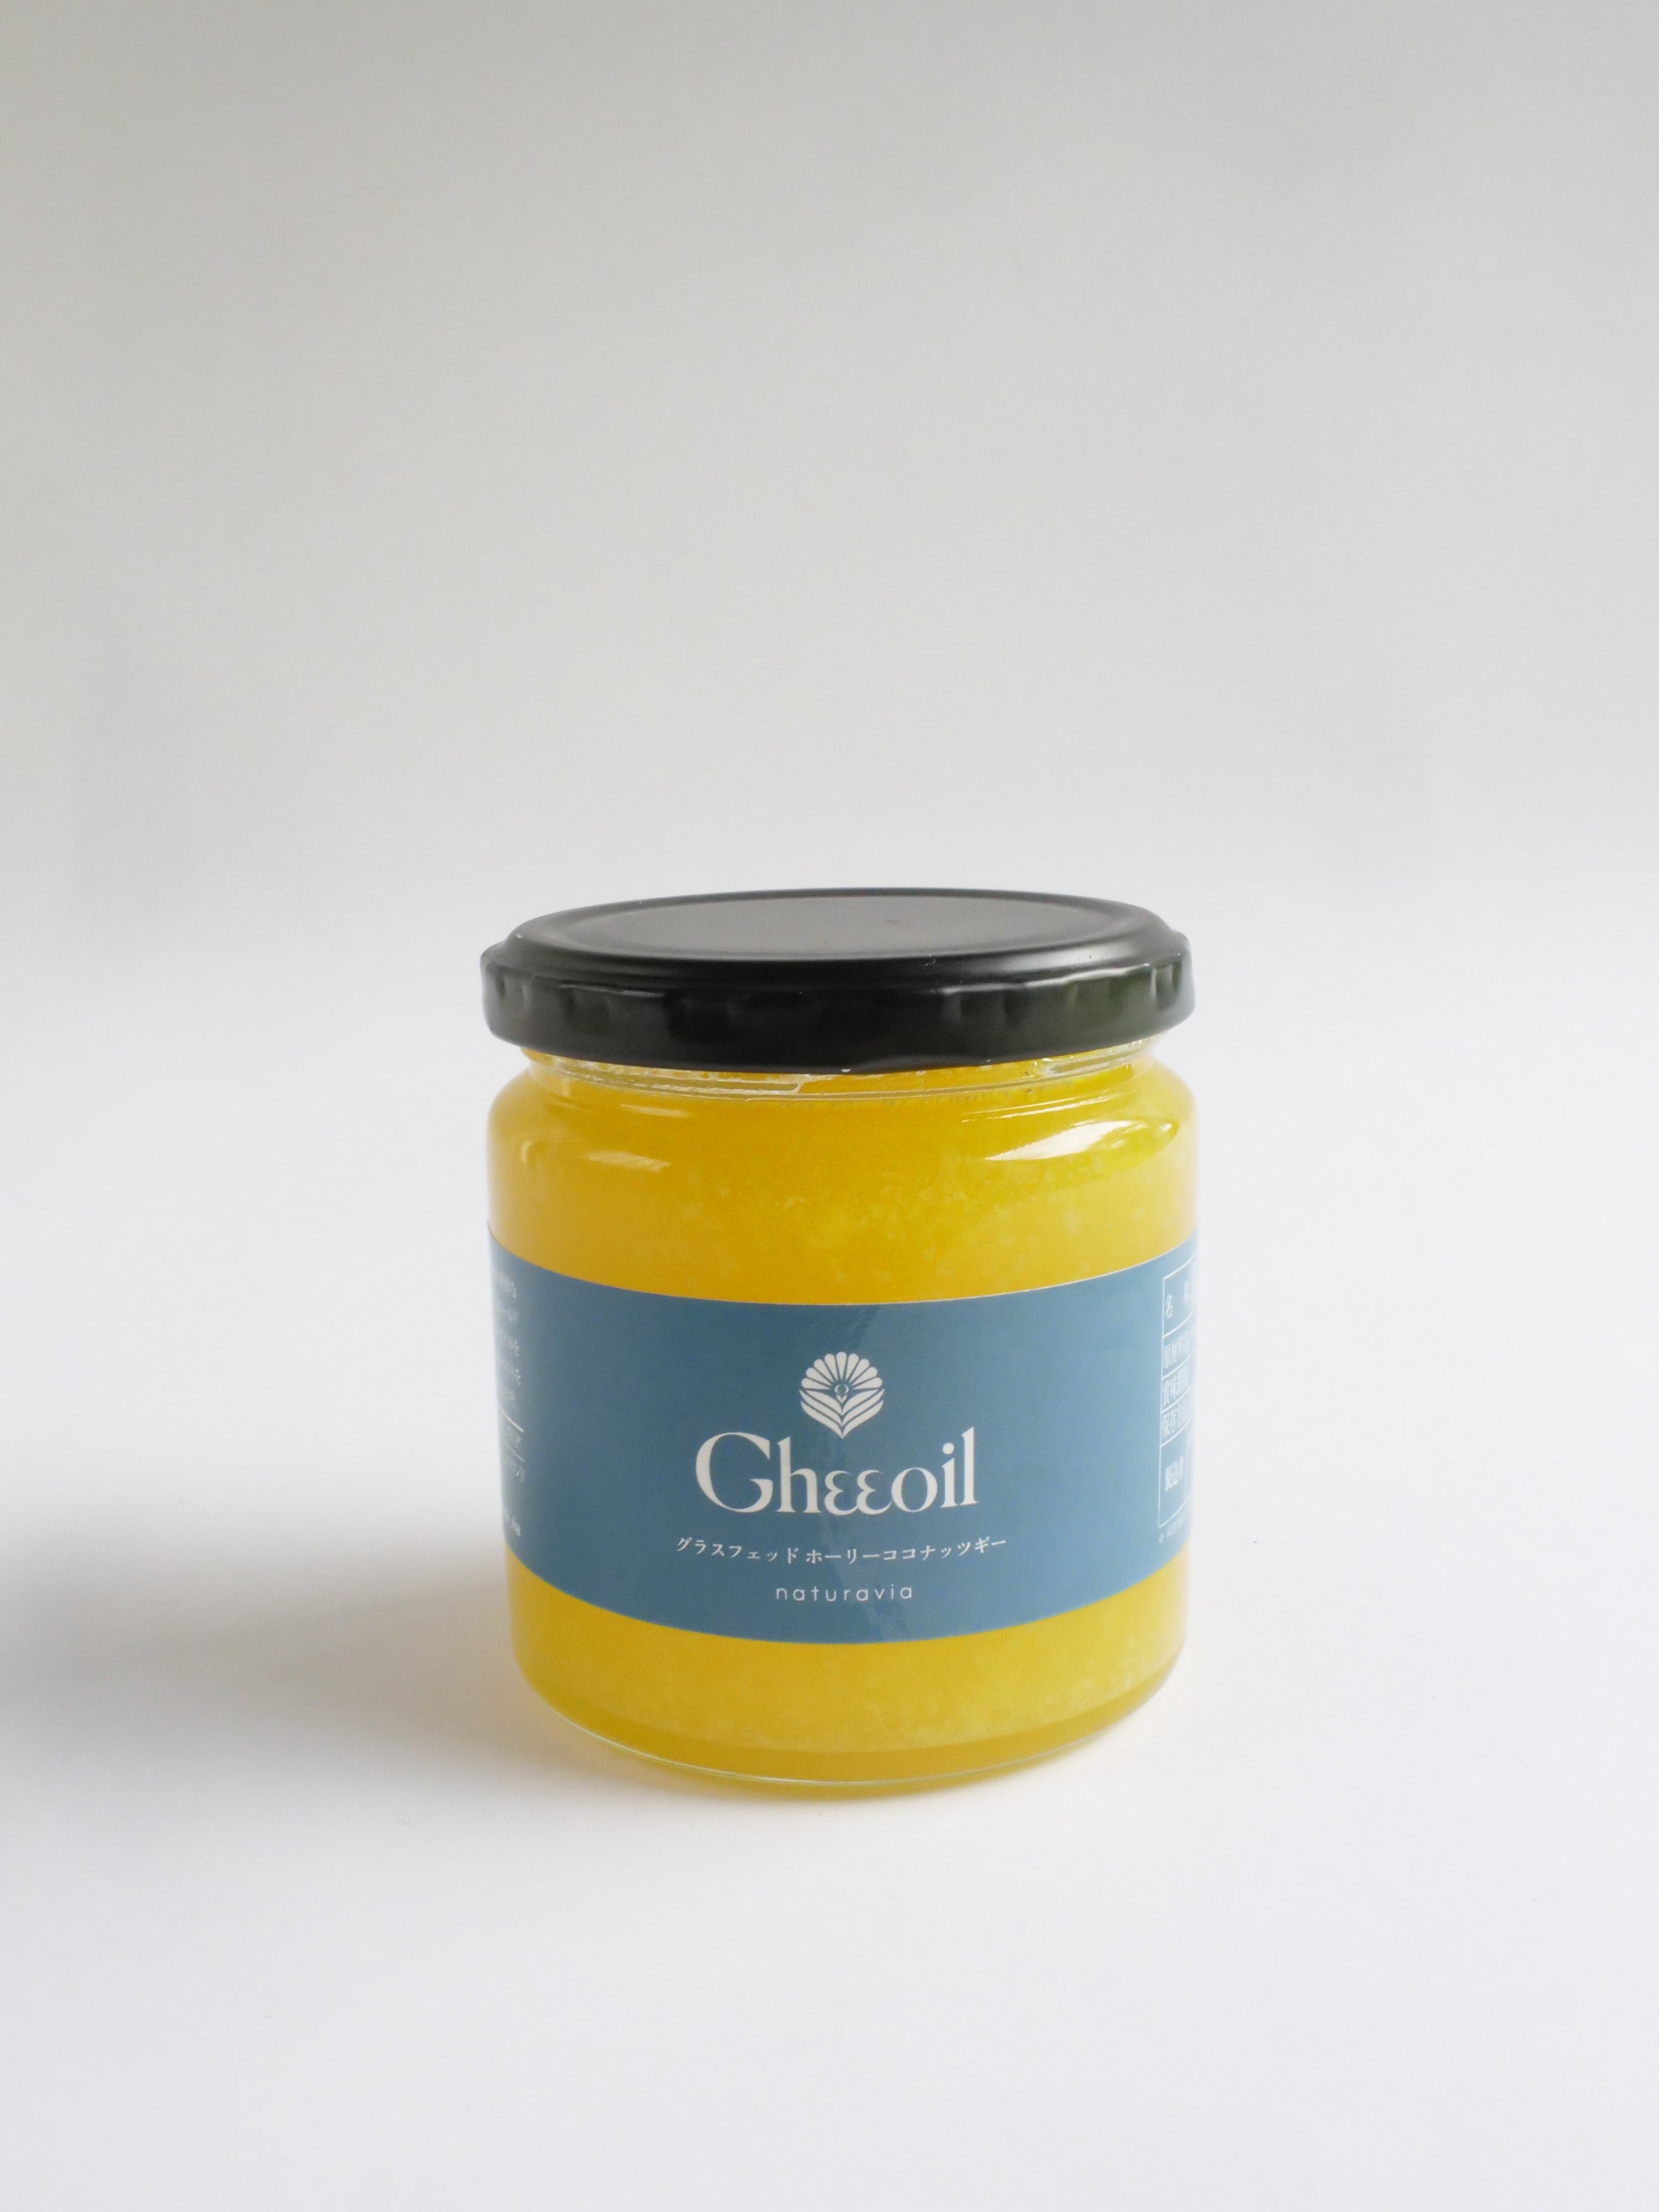 【NEW】 HOLY COCONUT GHEE